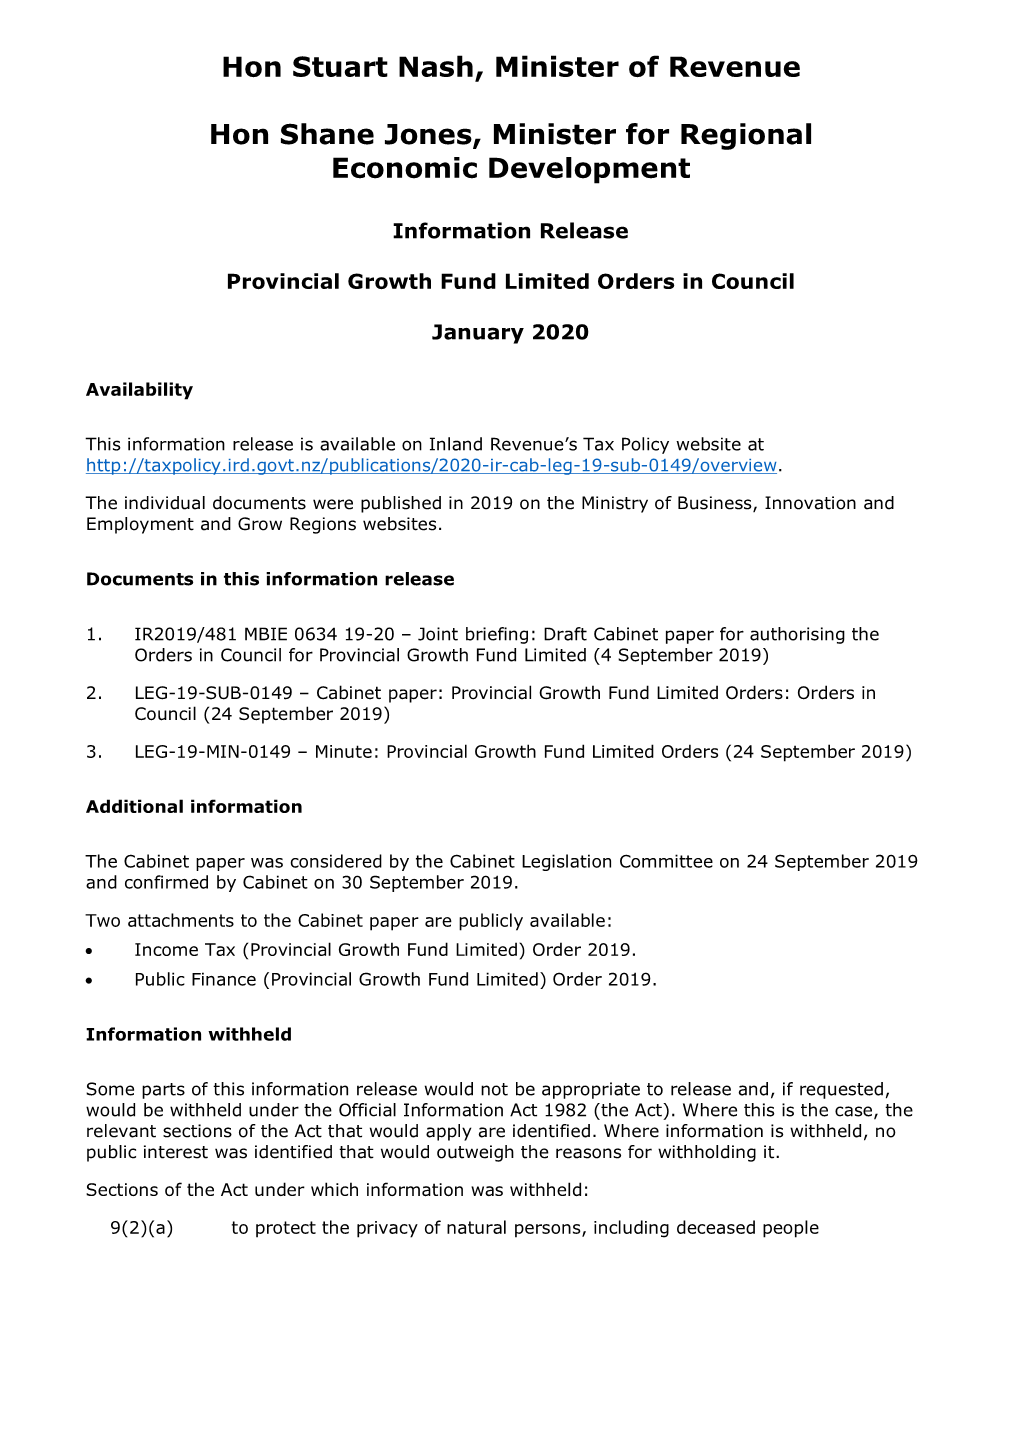 Provincial Growth Fund Limited Orders in Council (January 2020)